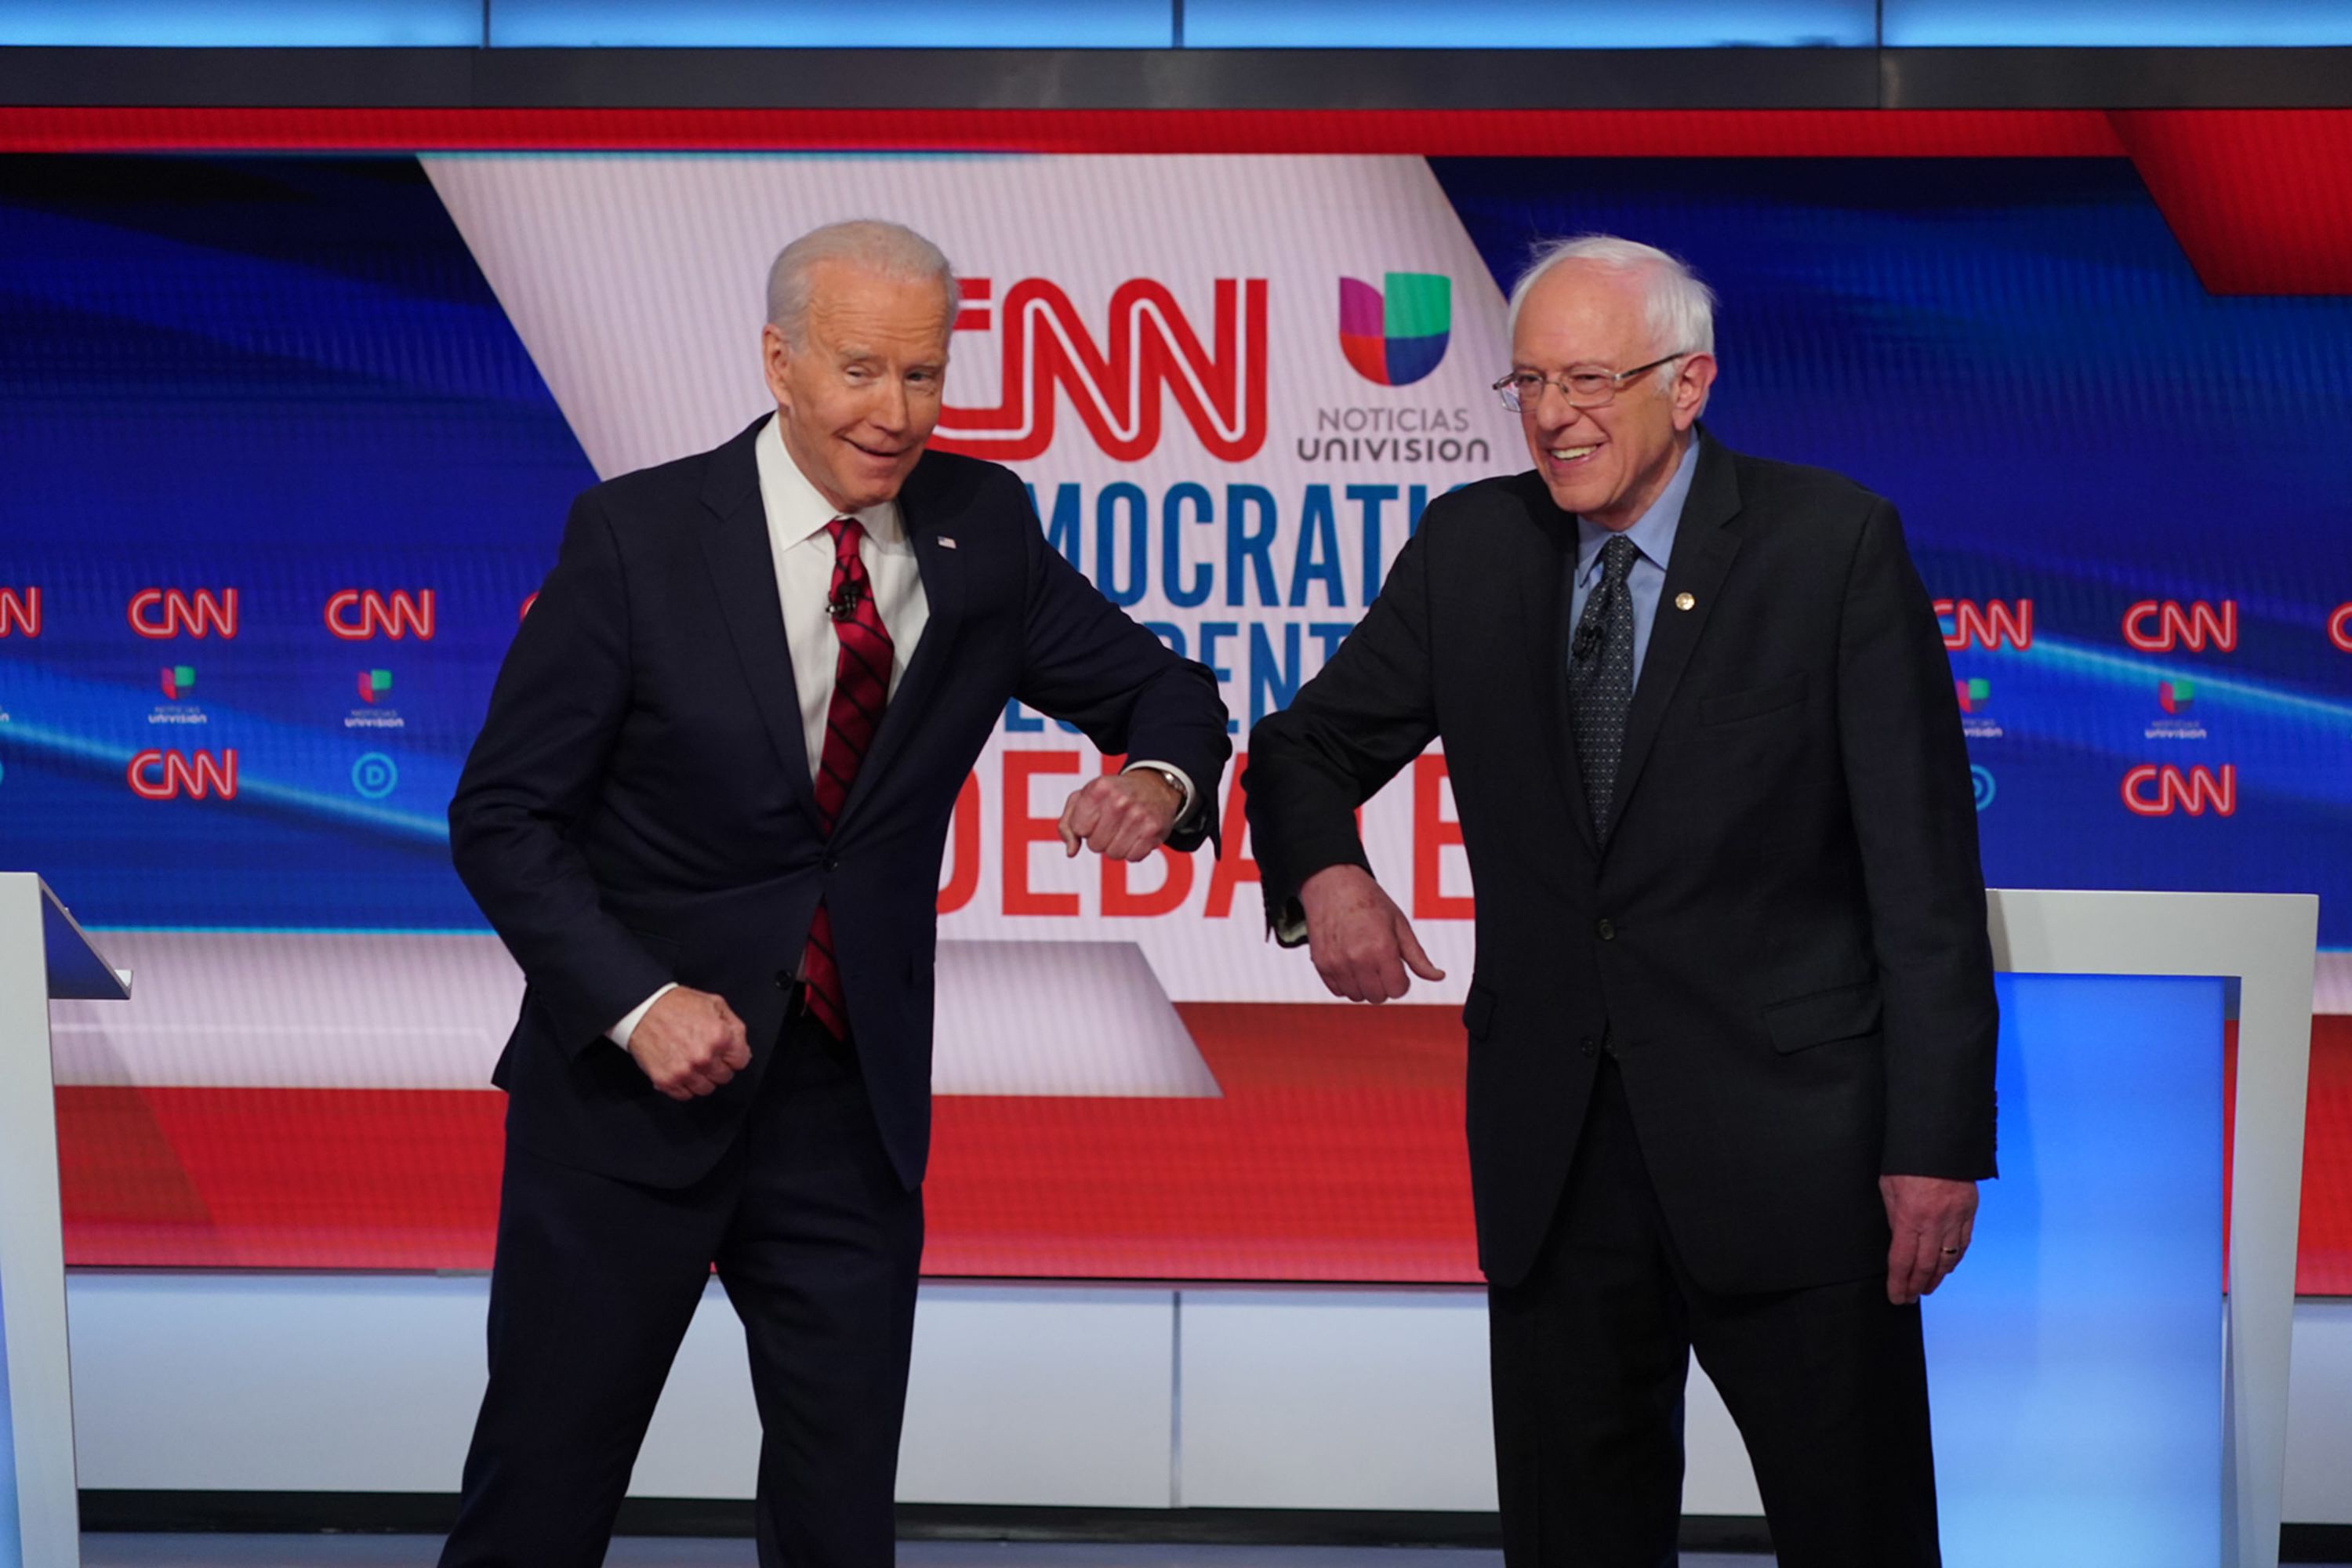 Former Vice President Joe Biden, left, greets US Sen. Bernie Sanders with an elbow bump before the start of Sunday night's debate in Washington. The Centers for Disease Control and Prevention suggests that people avoid handshakes to avoid the spread of the coronavirus.